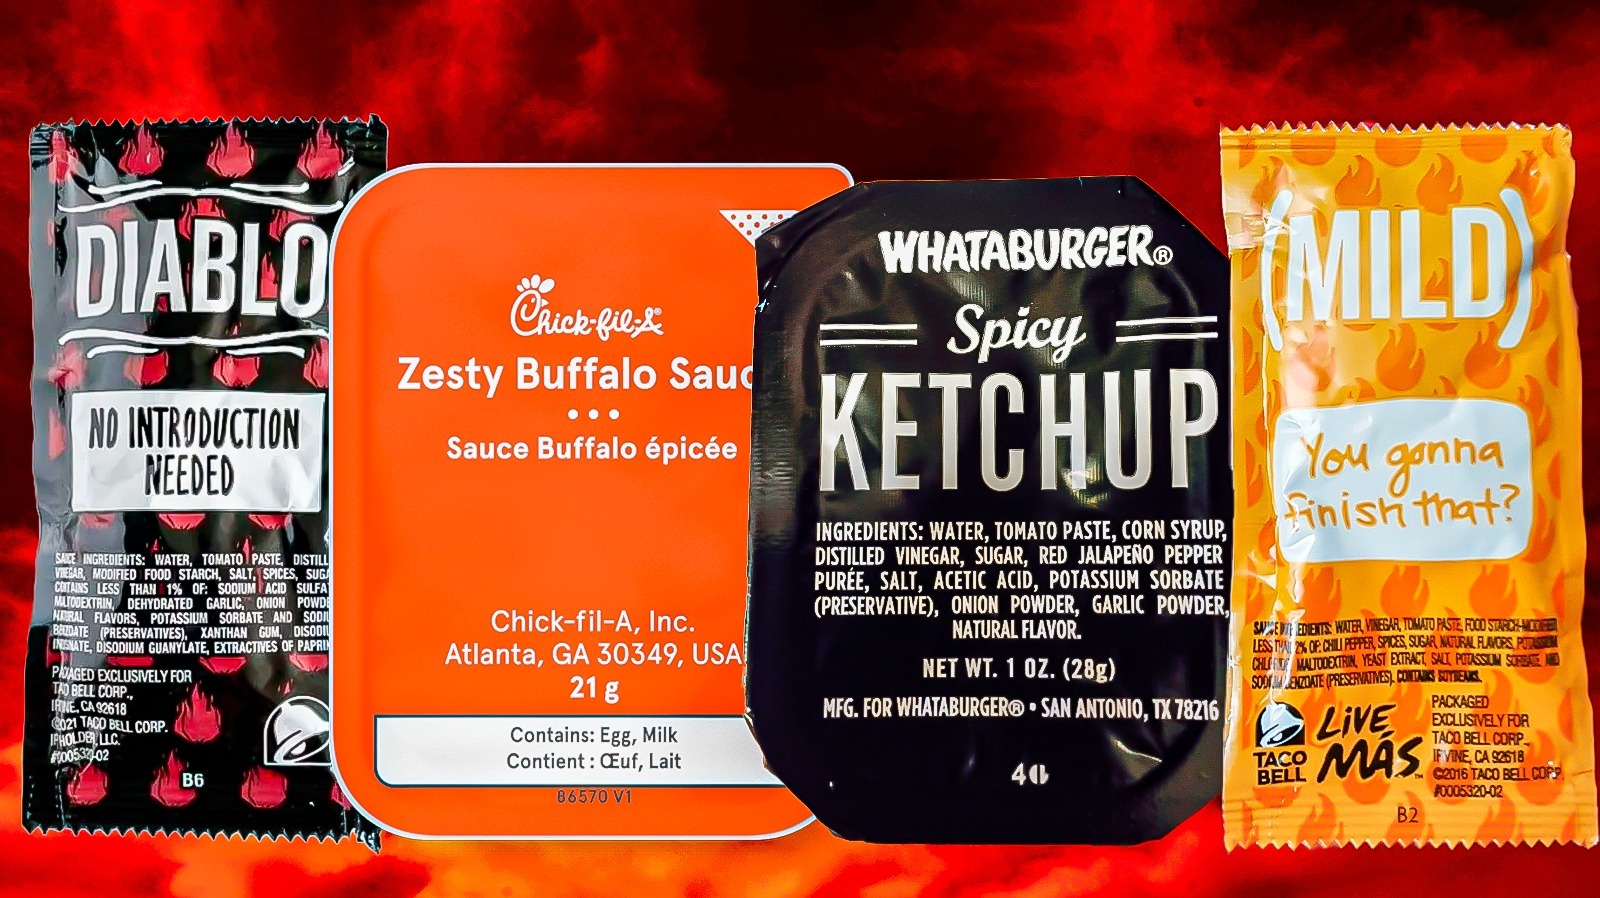 Let's rank the Whataburger ketchup options!! Which is your favorite!?